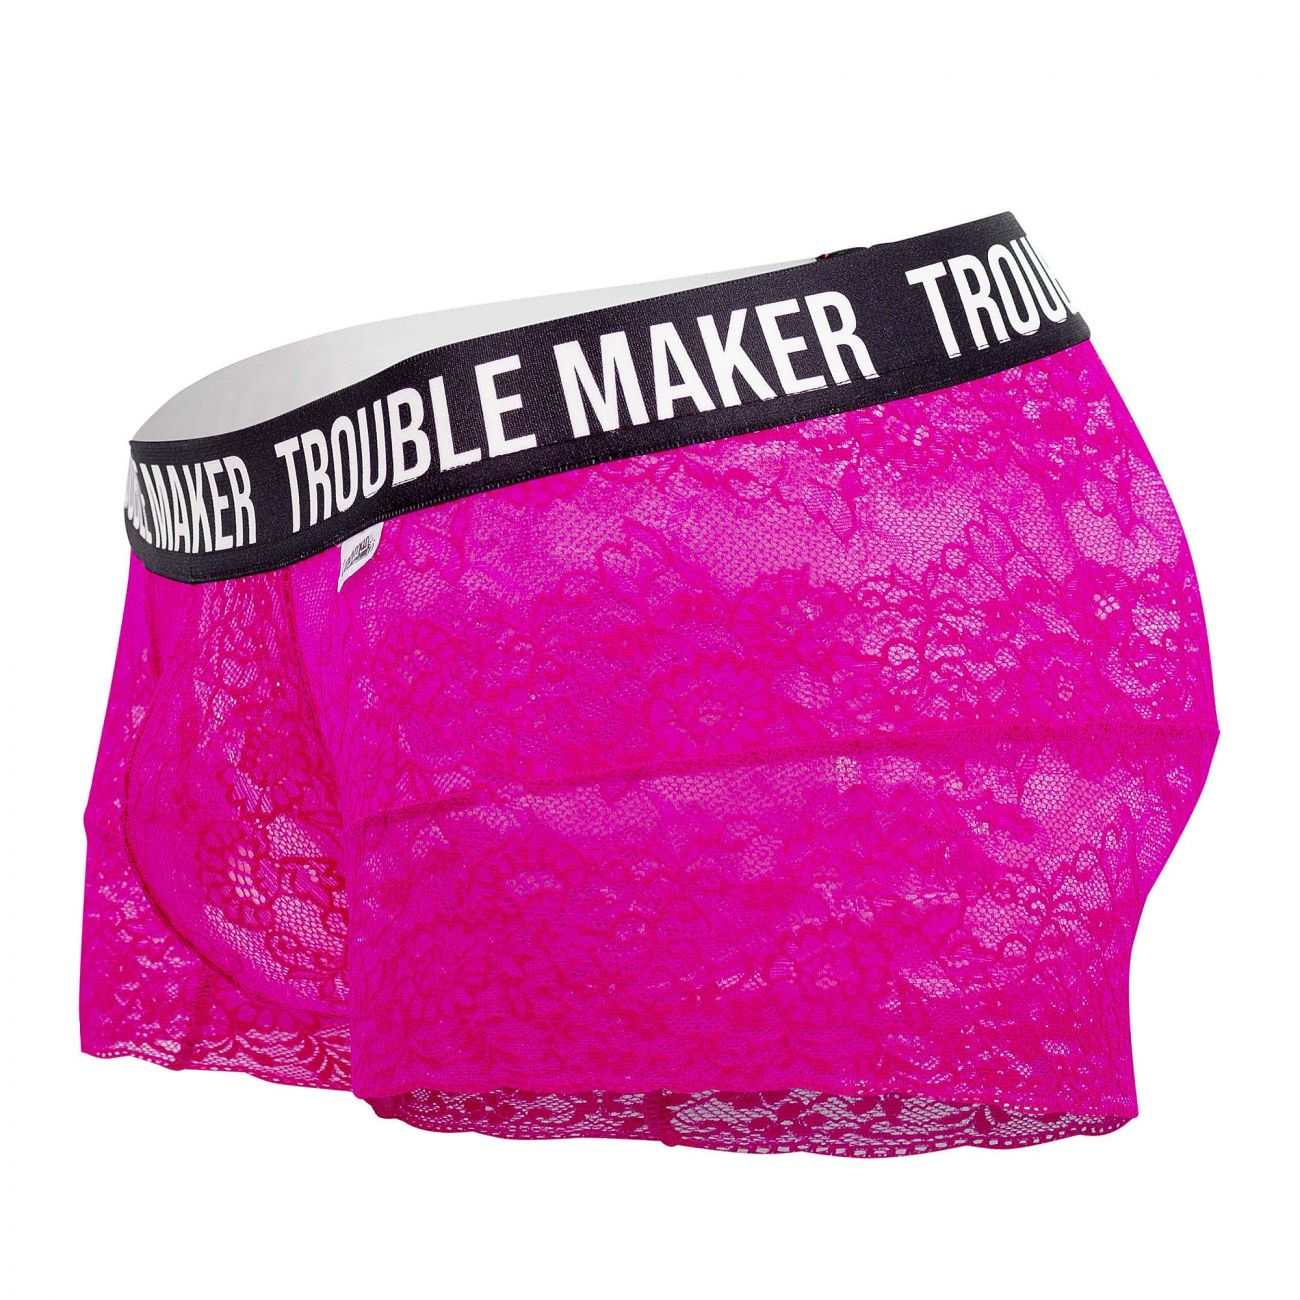 CandyMan 99616X Trouble Maker Lace Trunks Pink Plus Sizes